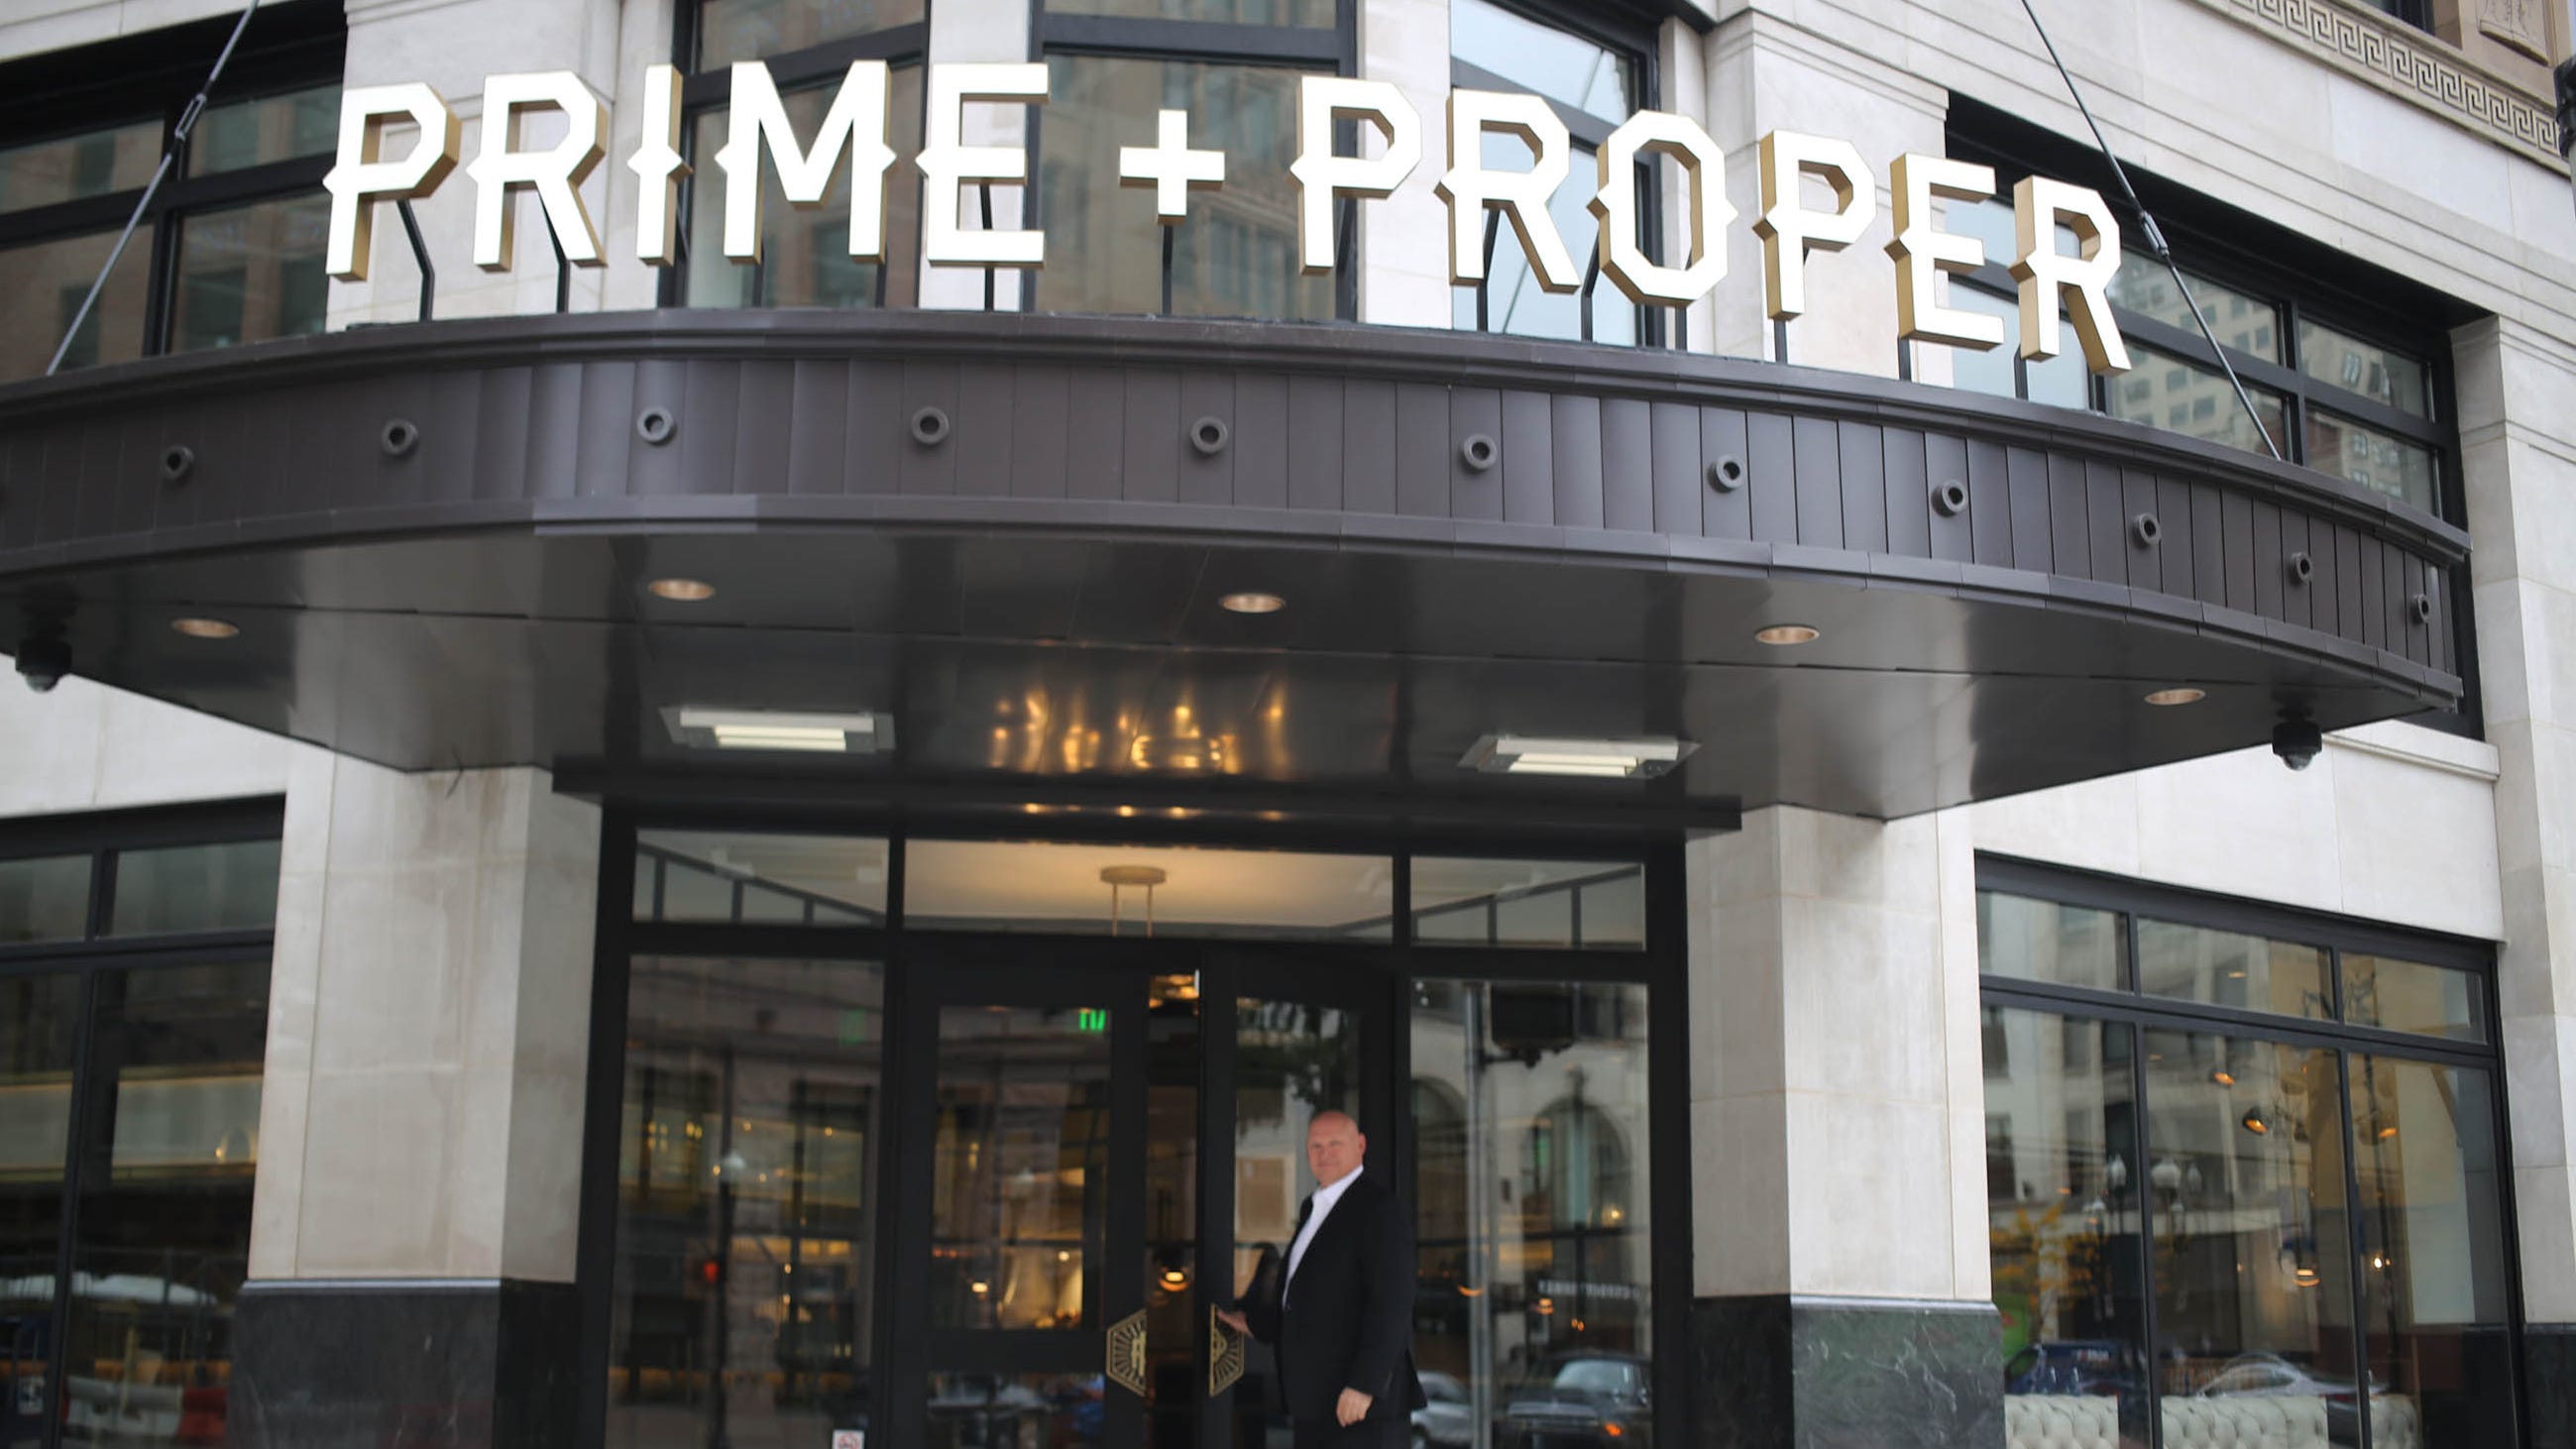 Altercation at Prime + Proper in Detroit leaves 1 dead, 1 wounded